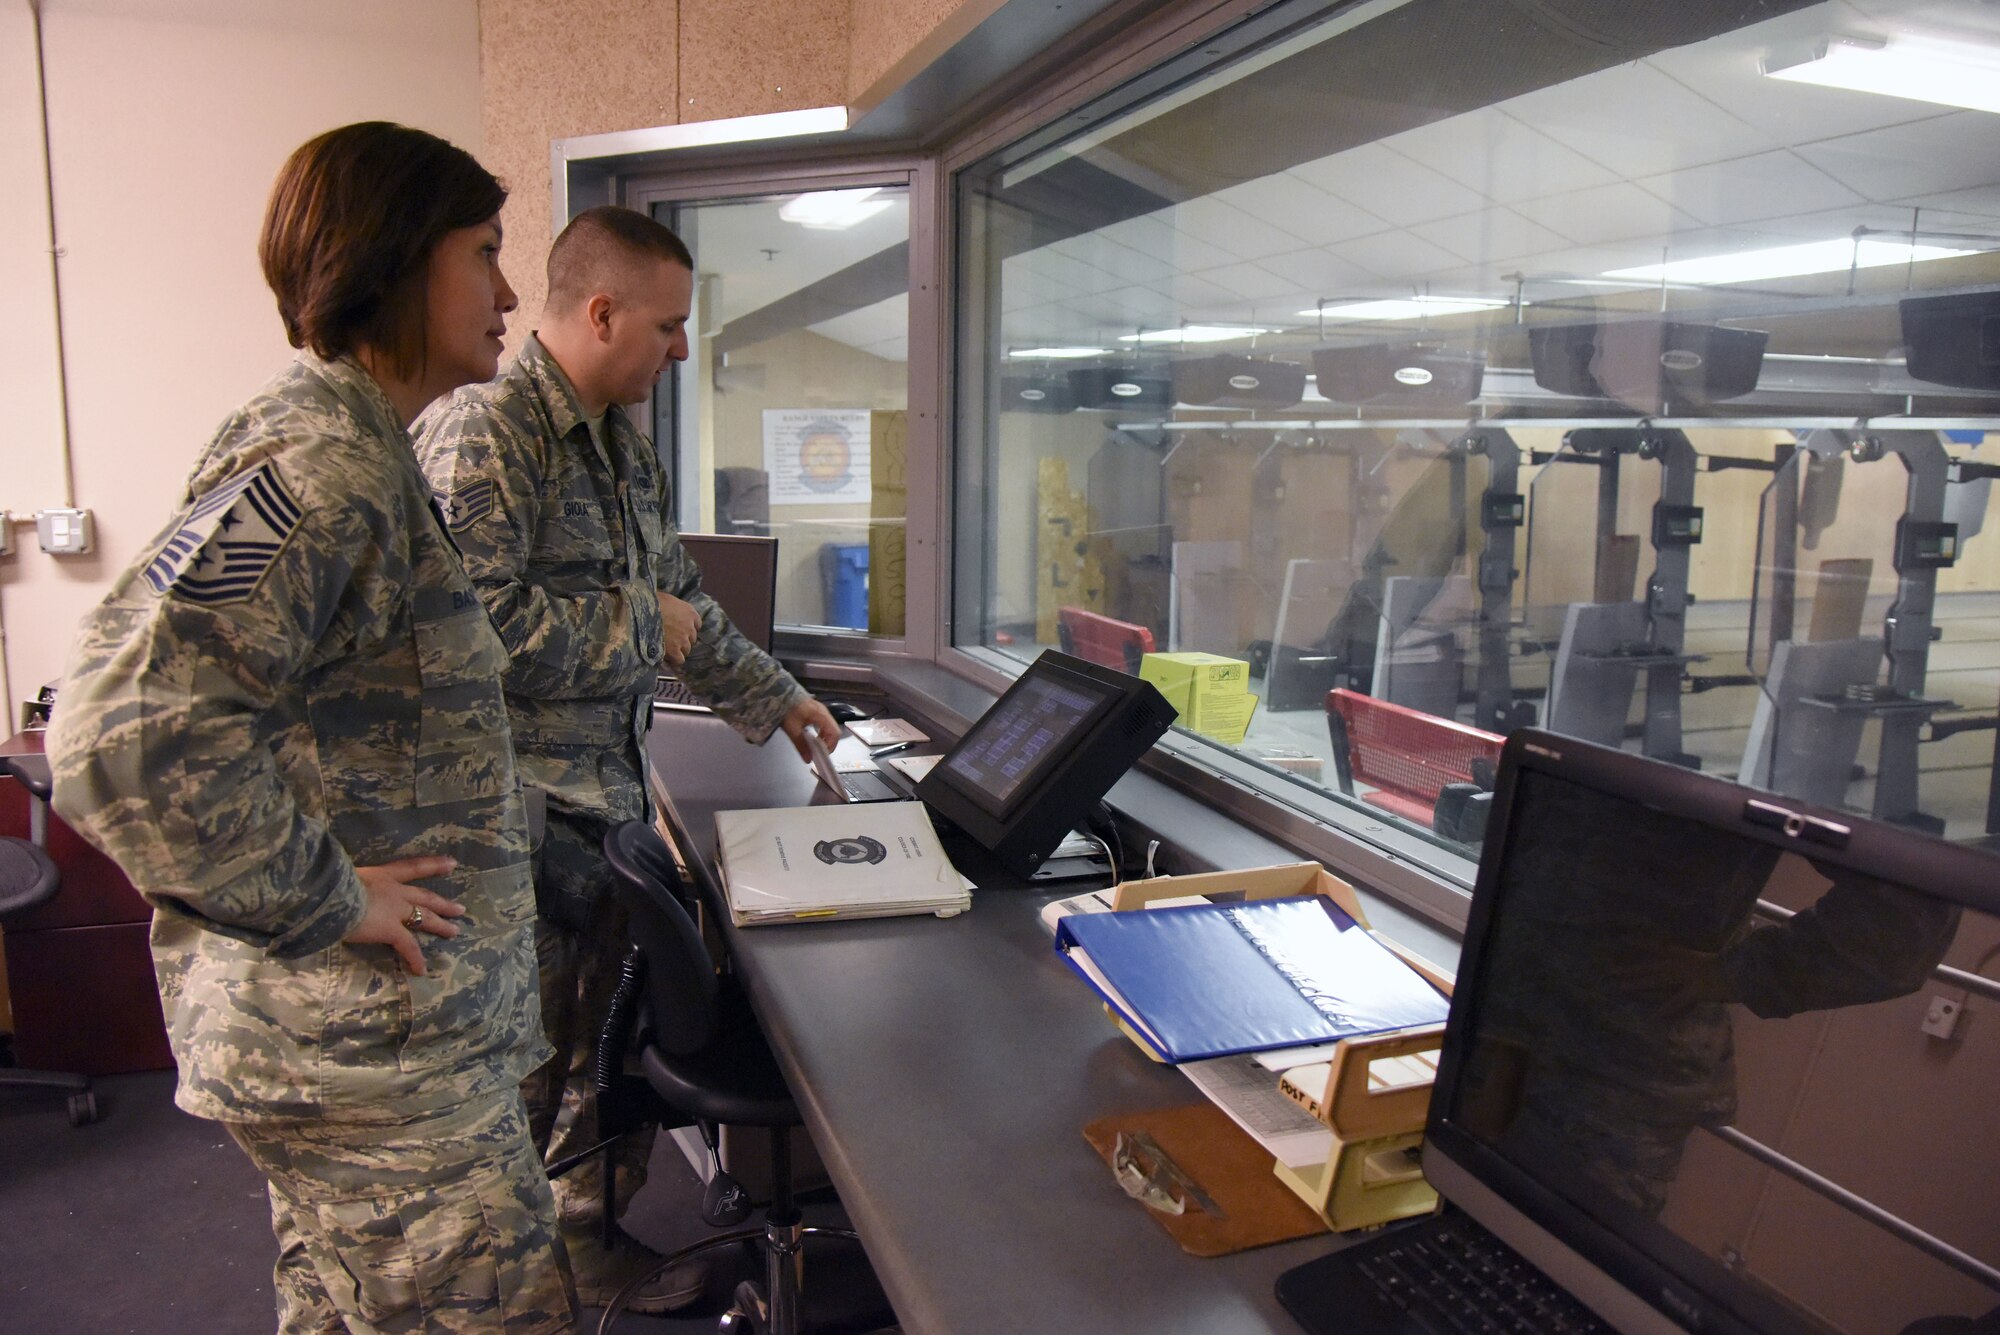 Staff Sgt. Derek Gioia, 81st Security Forces Squadron combat arms instructor, demonstrates the capabilities of the 81st SFS indoor firing range for Chief Master Sgt. JoAnne Bass, 2nd Air Force command chief, during an immersion tour on Keesler Air Force Base, Mississippi, Aug. 23, 2018. Bass's one-day tour also included the Keesler Medical Center, 81st Training Group and Wing Staff Agency. (U.S. Air Force photo by Kemberly Groue)